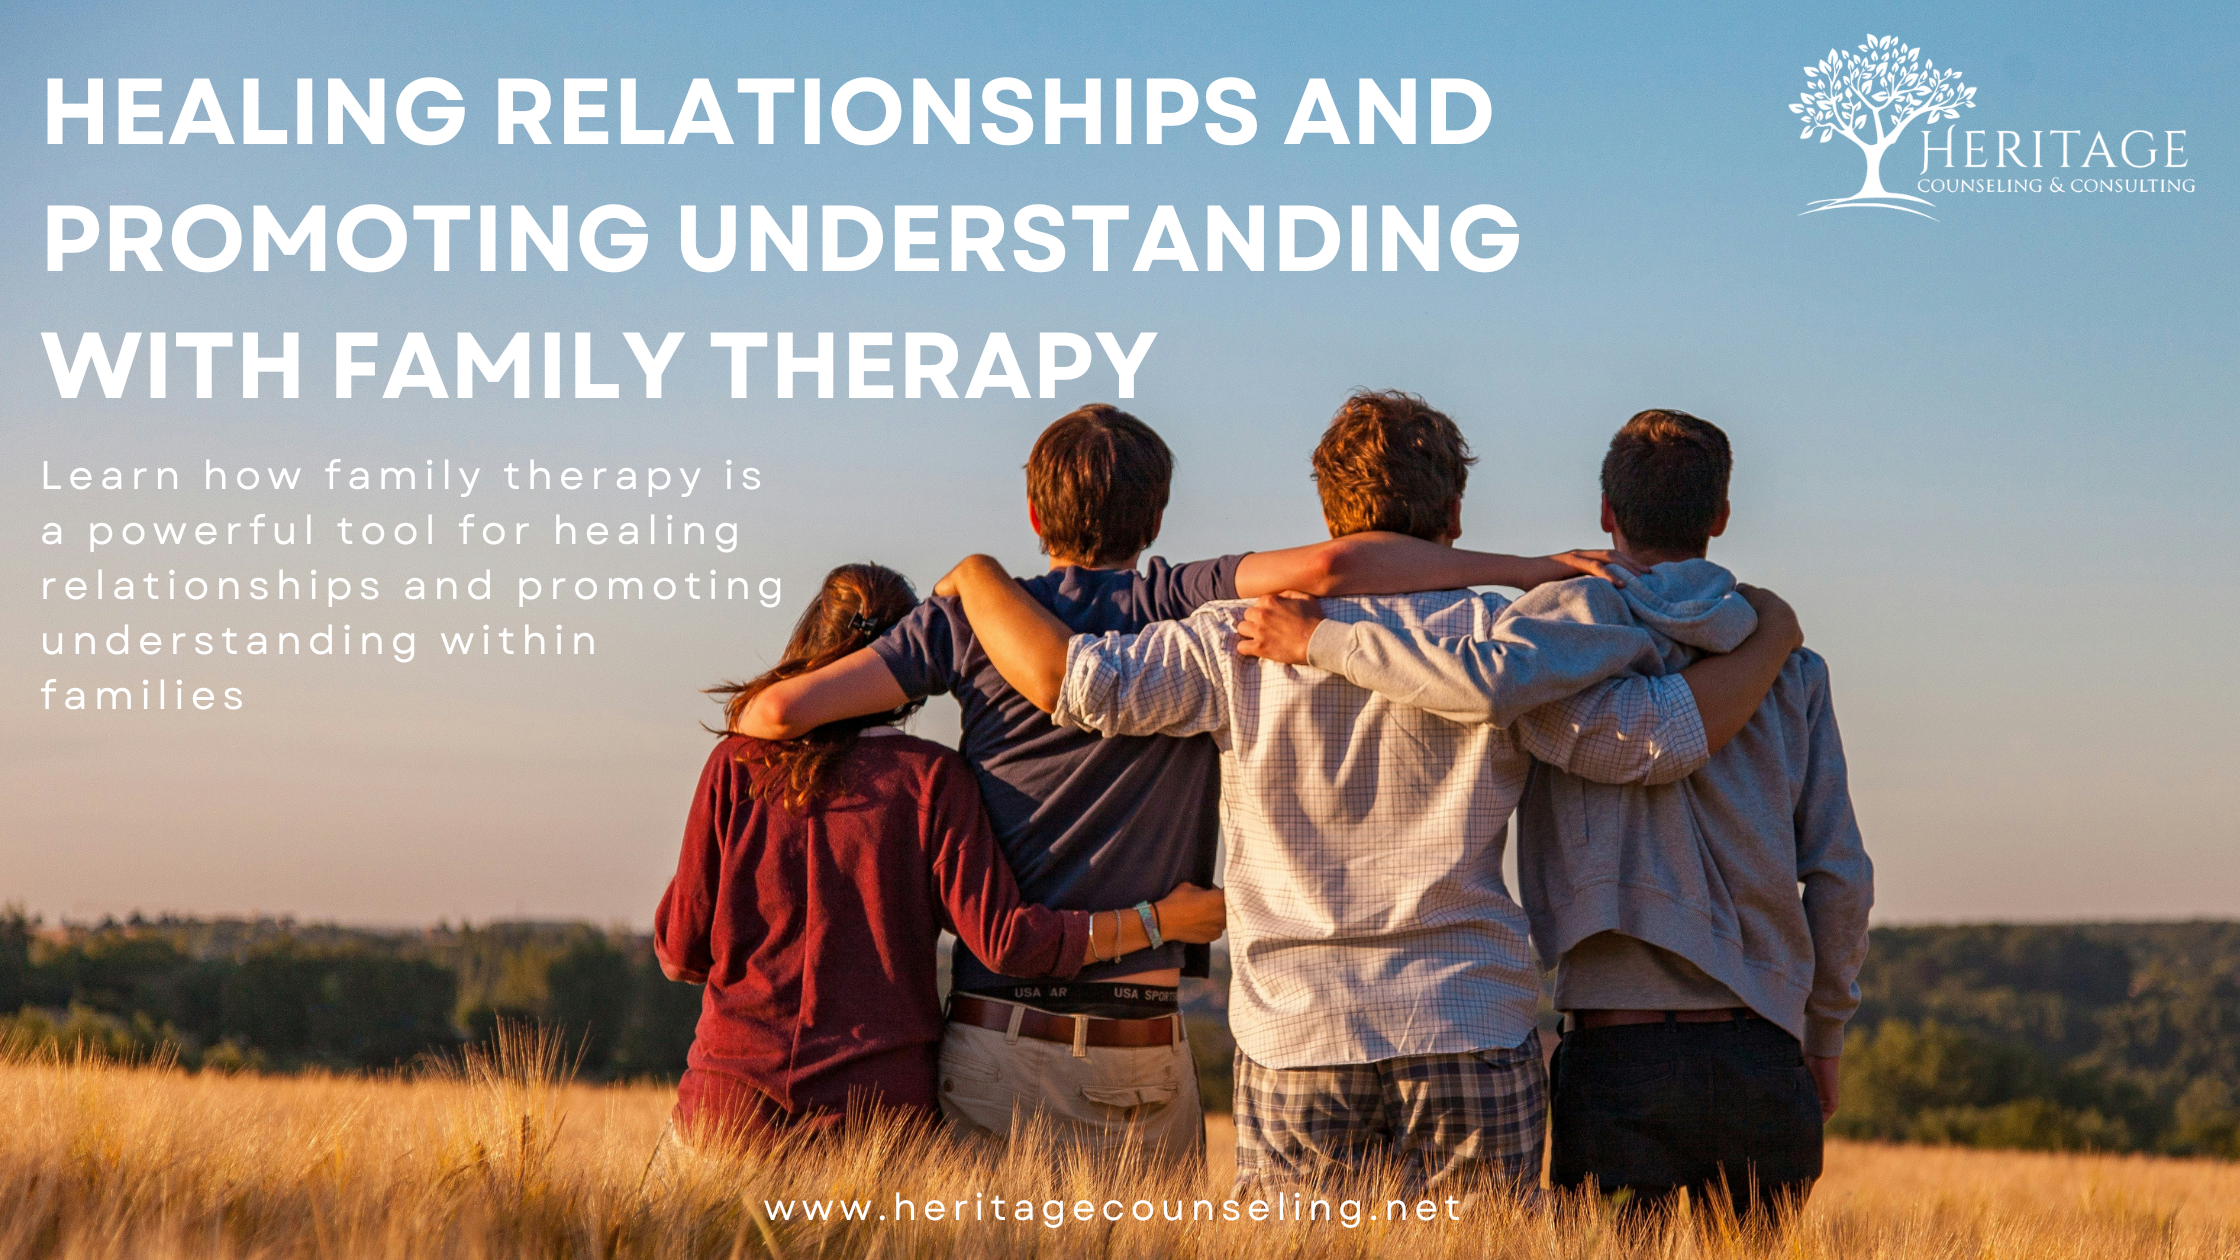 Healing Relationships and Promoting Understanding with Family Therapy